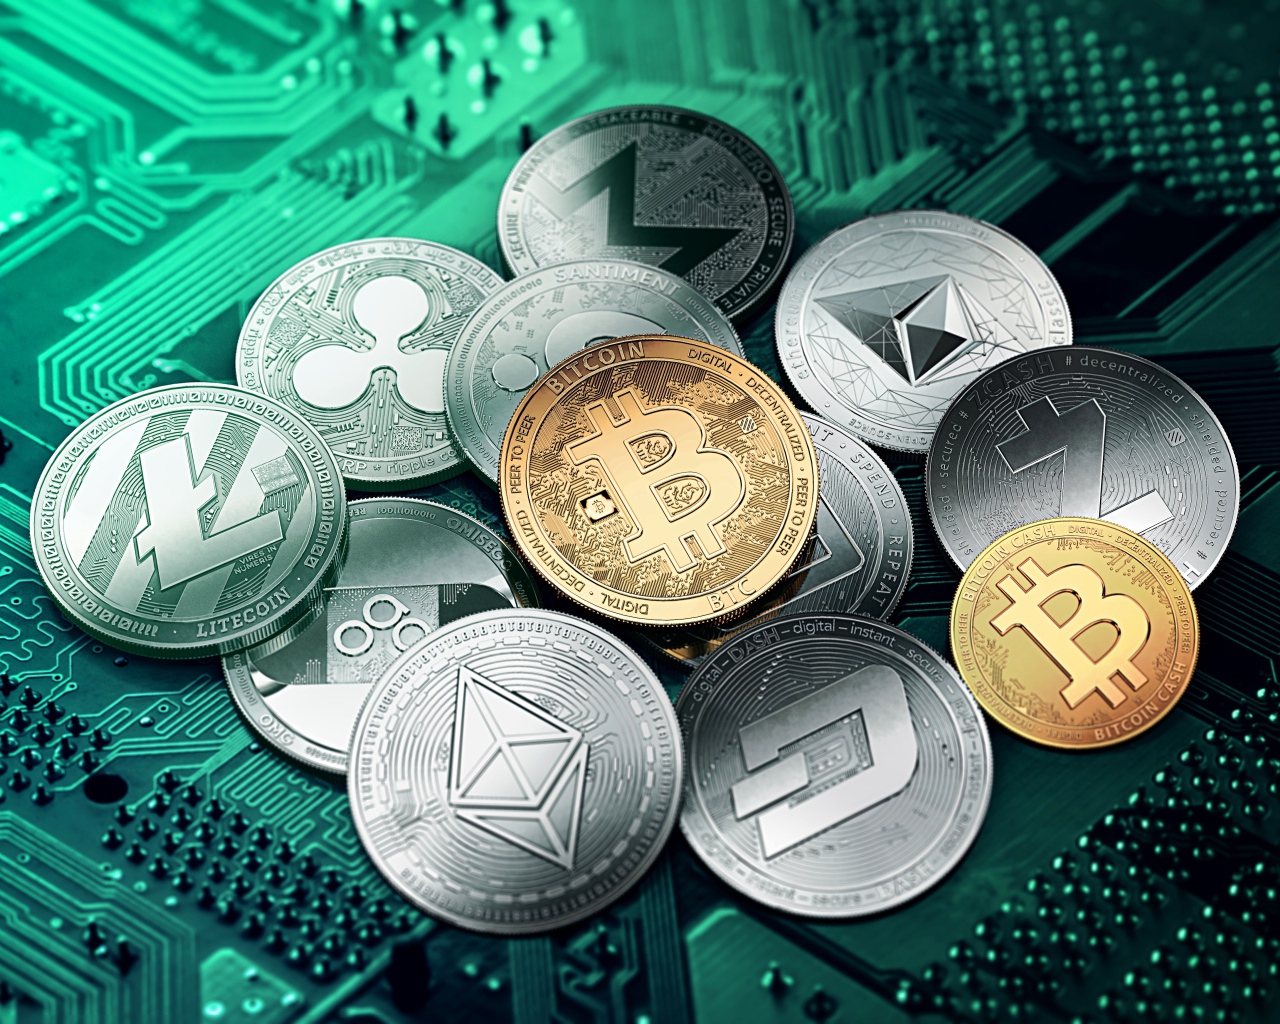 Cryptocurrency coins are on the computer board